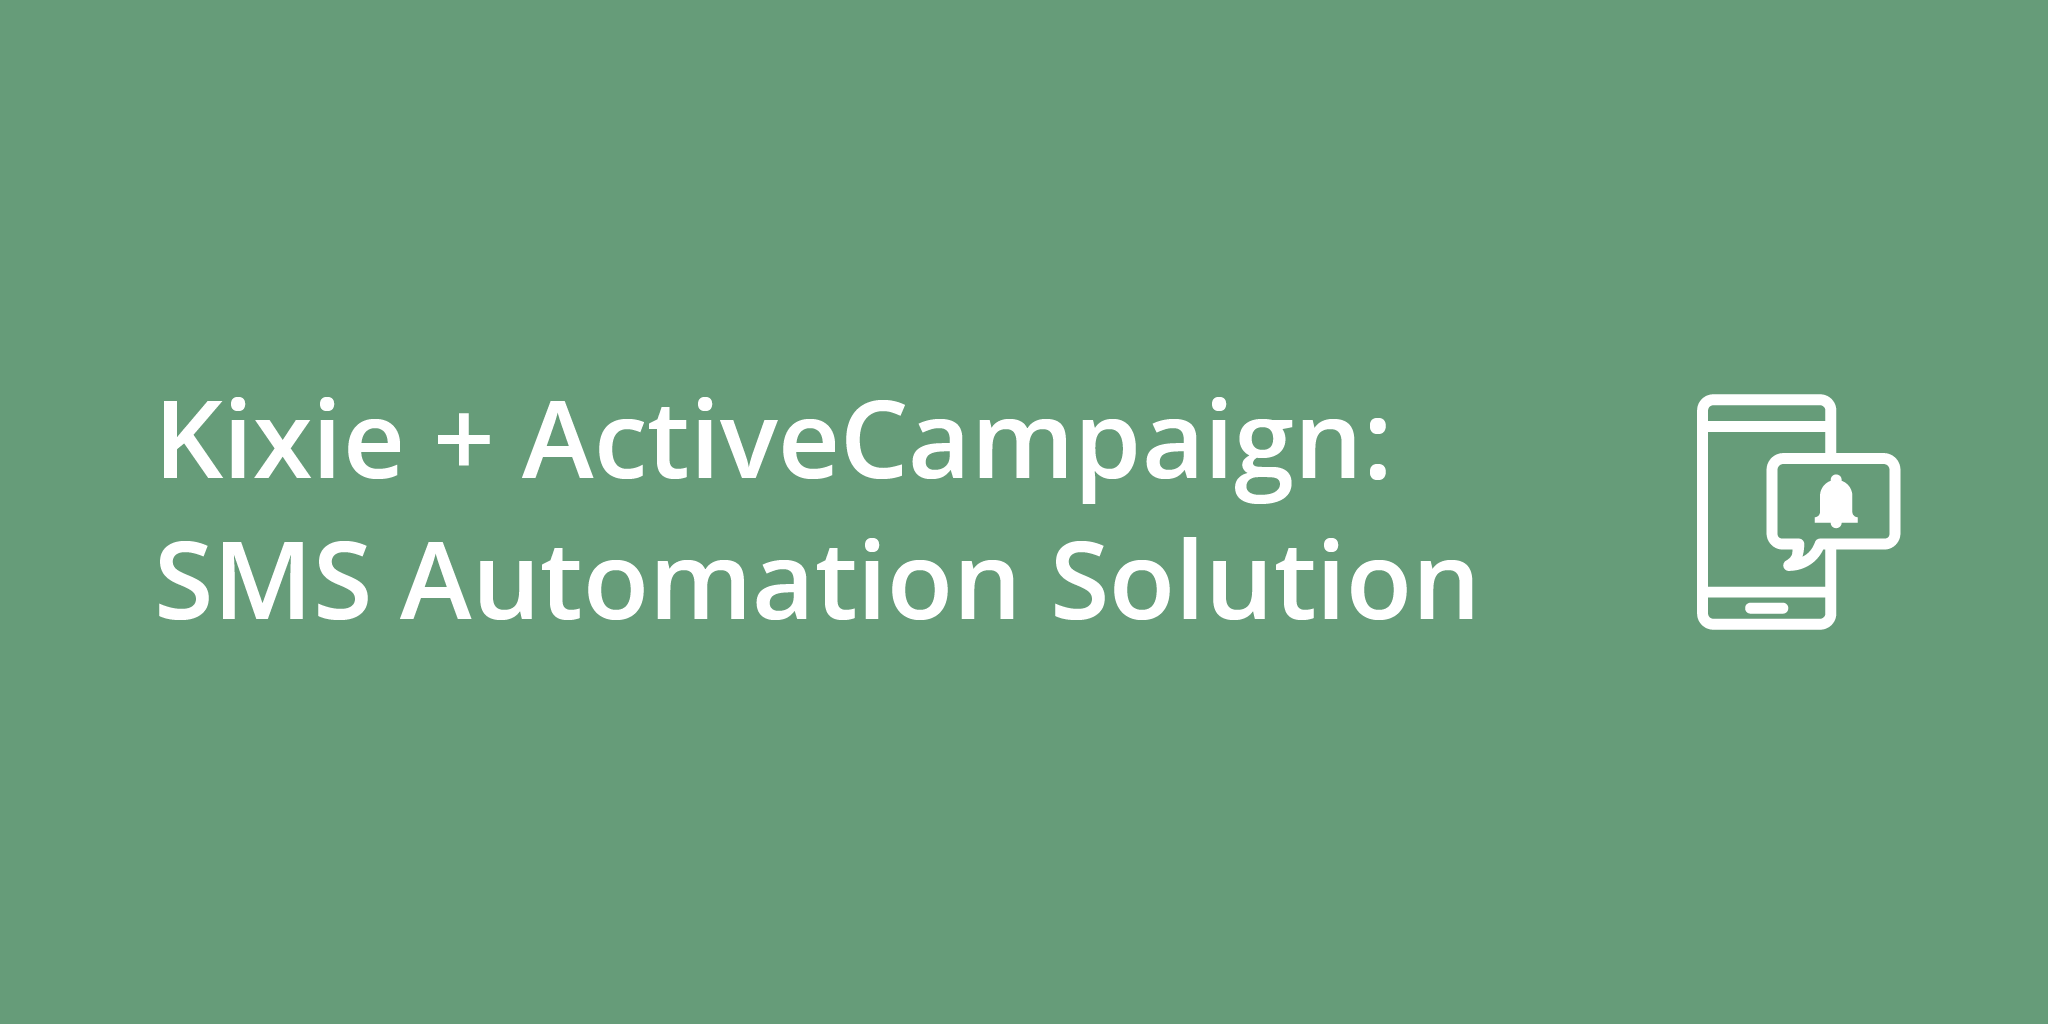 Kixie + ActiveCampaign: SMS Automation Solution | Telephones for business